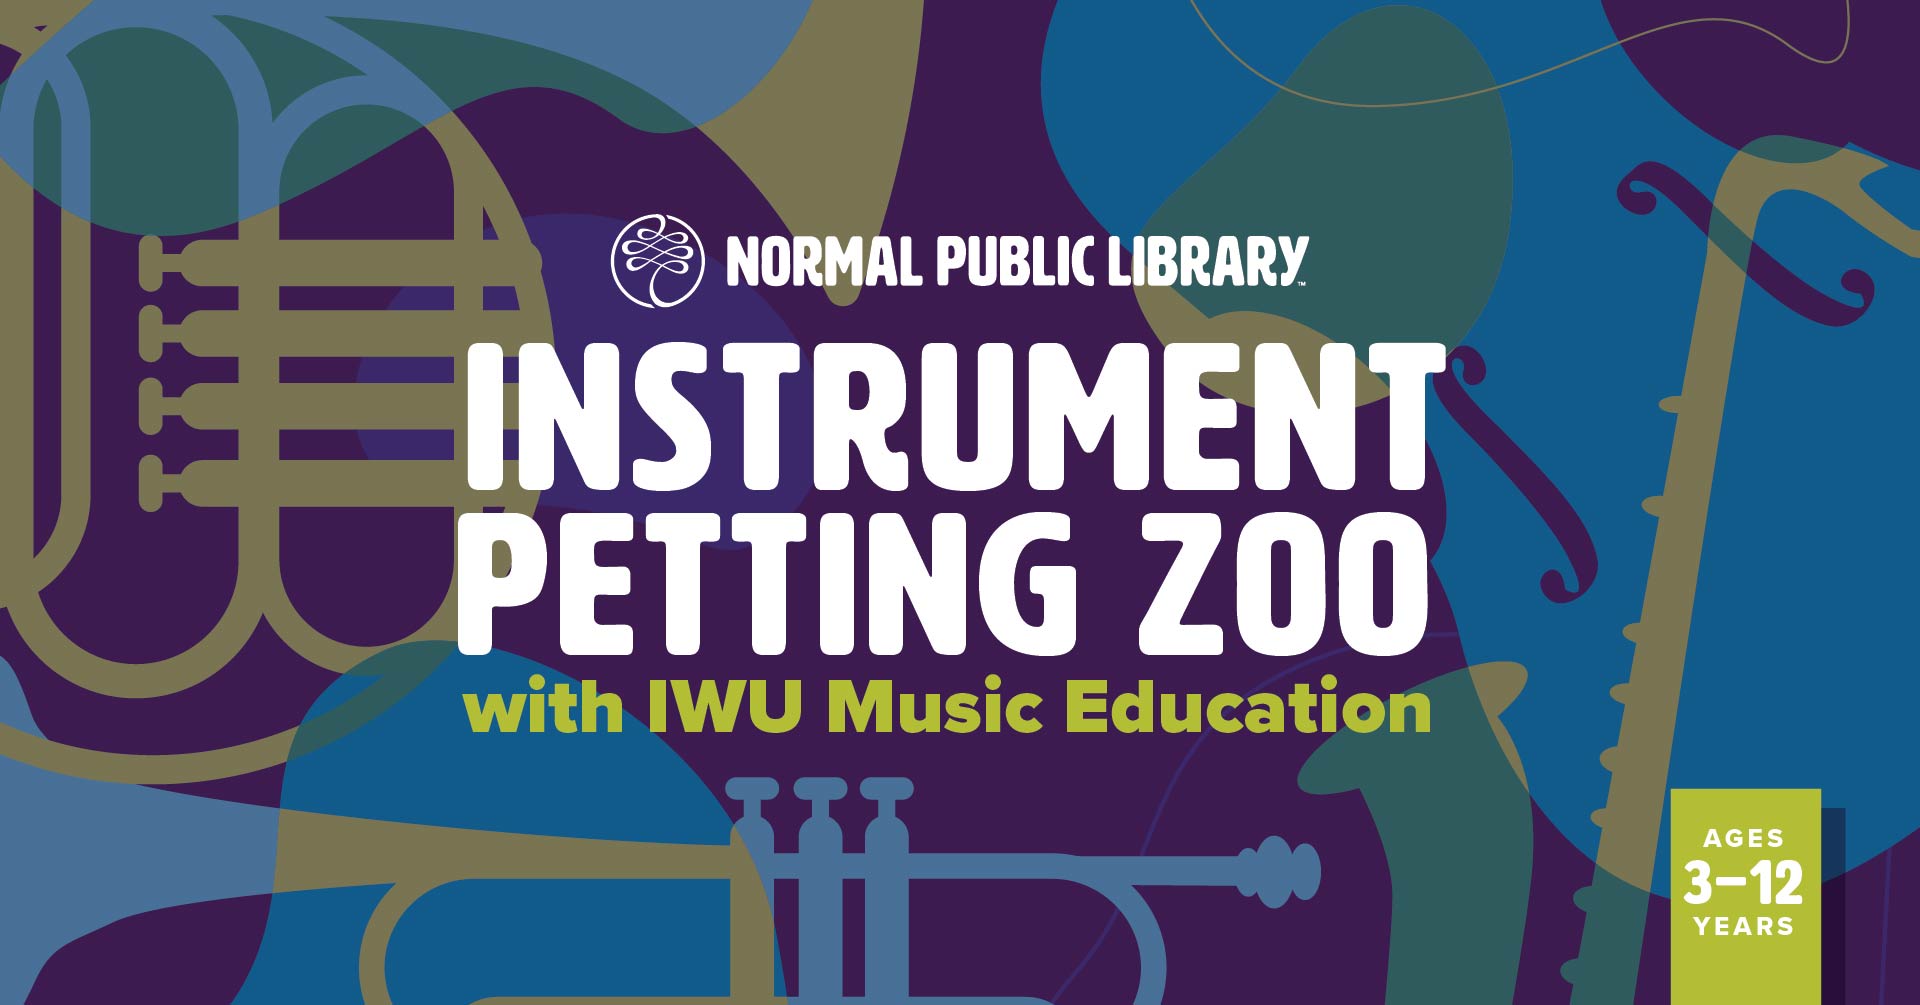 Image for Instrument Petting Zoo.